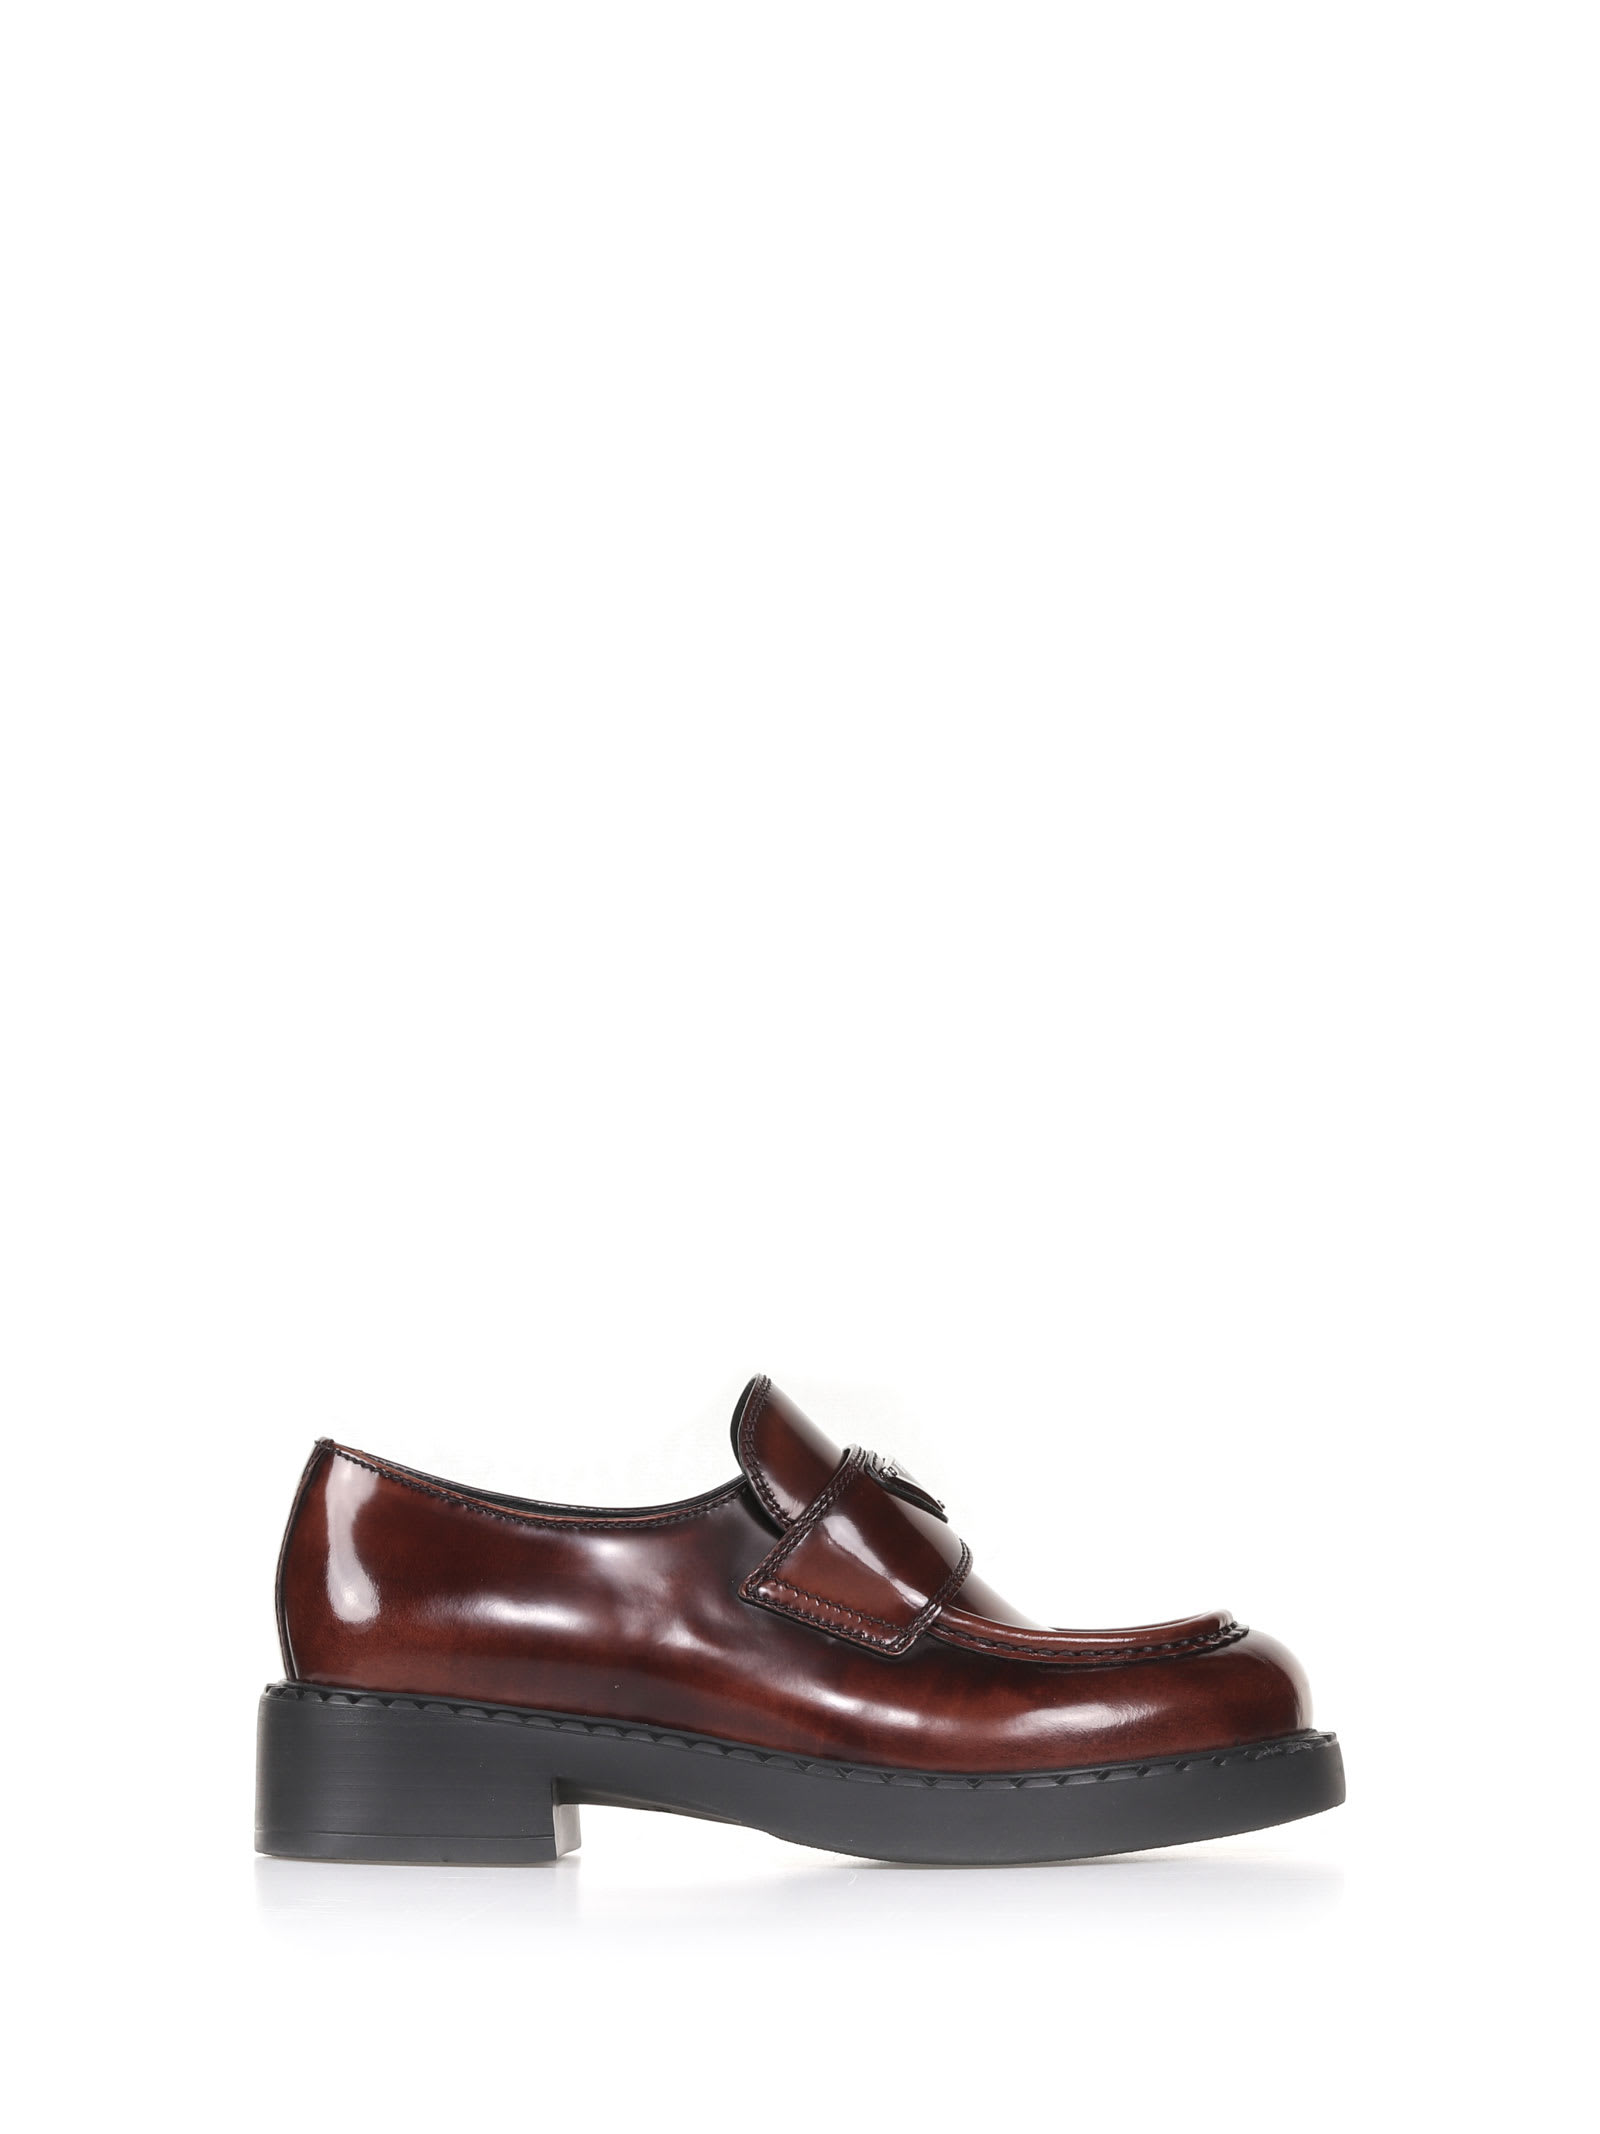 Prada Loafer In Brushed Leather